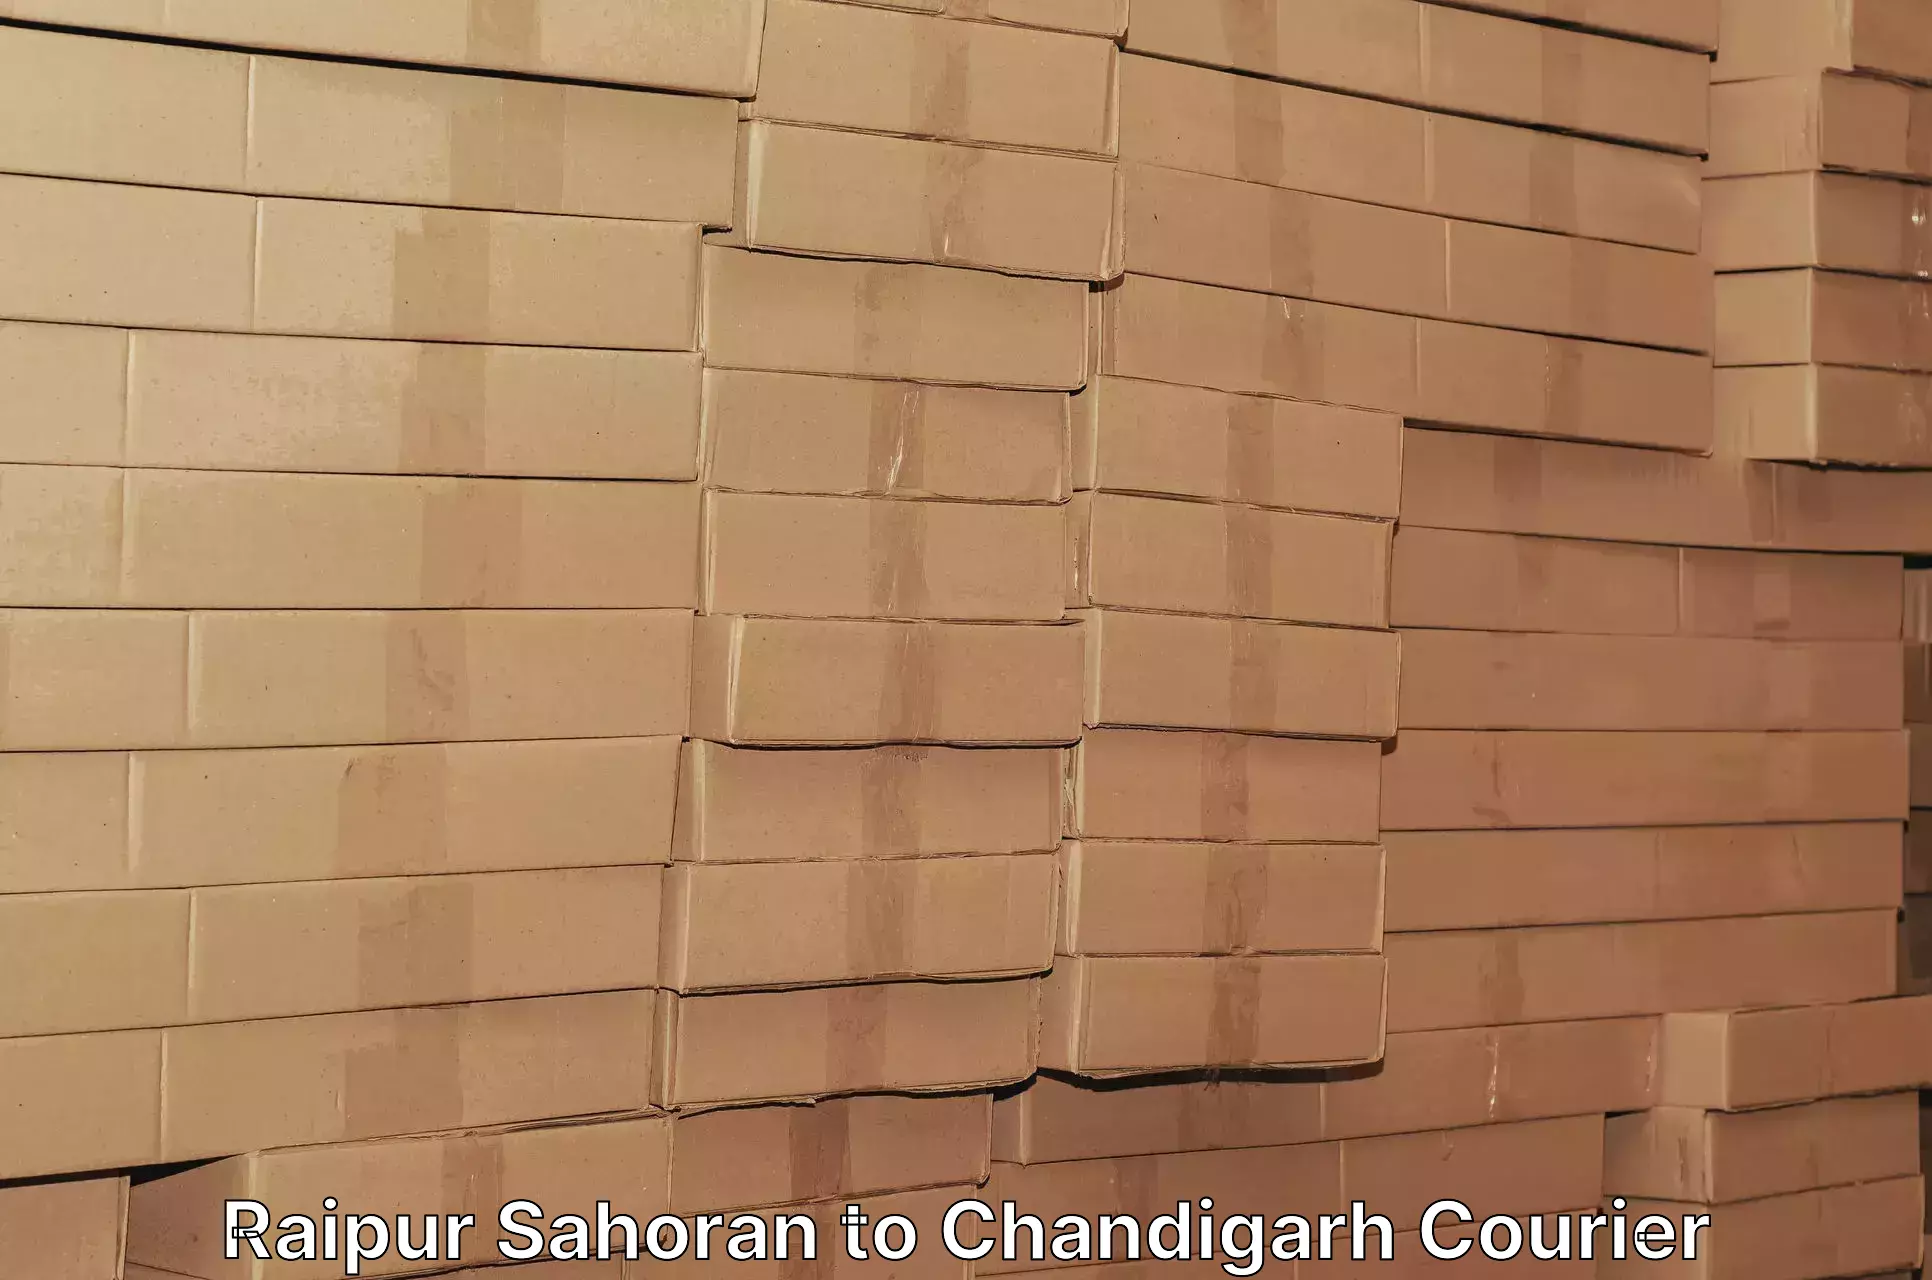 Advanced package delivery Raipur Sahoran to Chandigarh